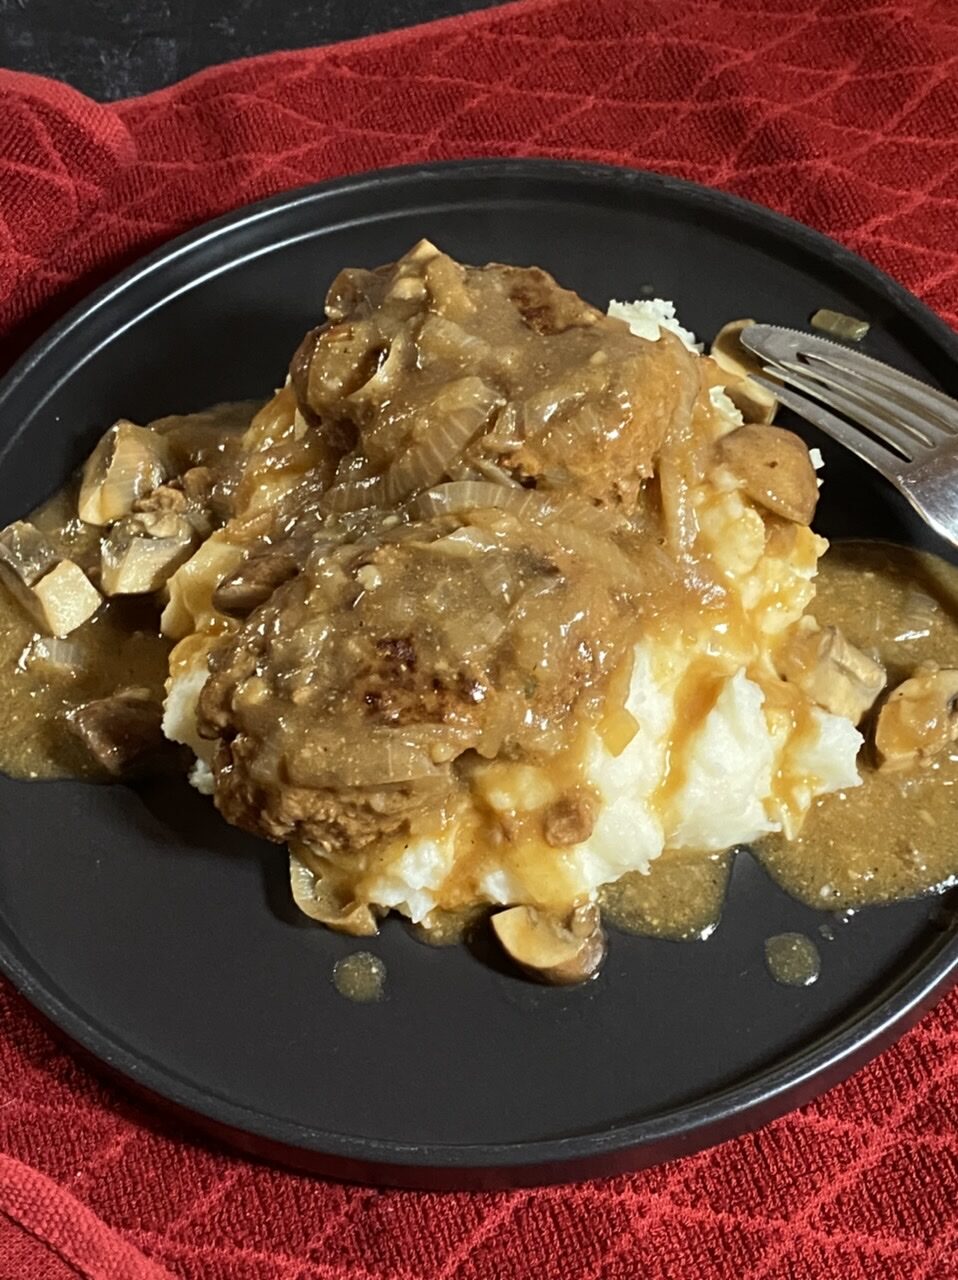 Salisbury steak and gravy over mashed potatoes on a black plate on top of a red towel